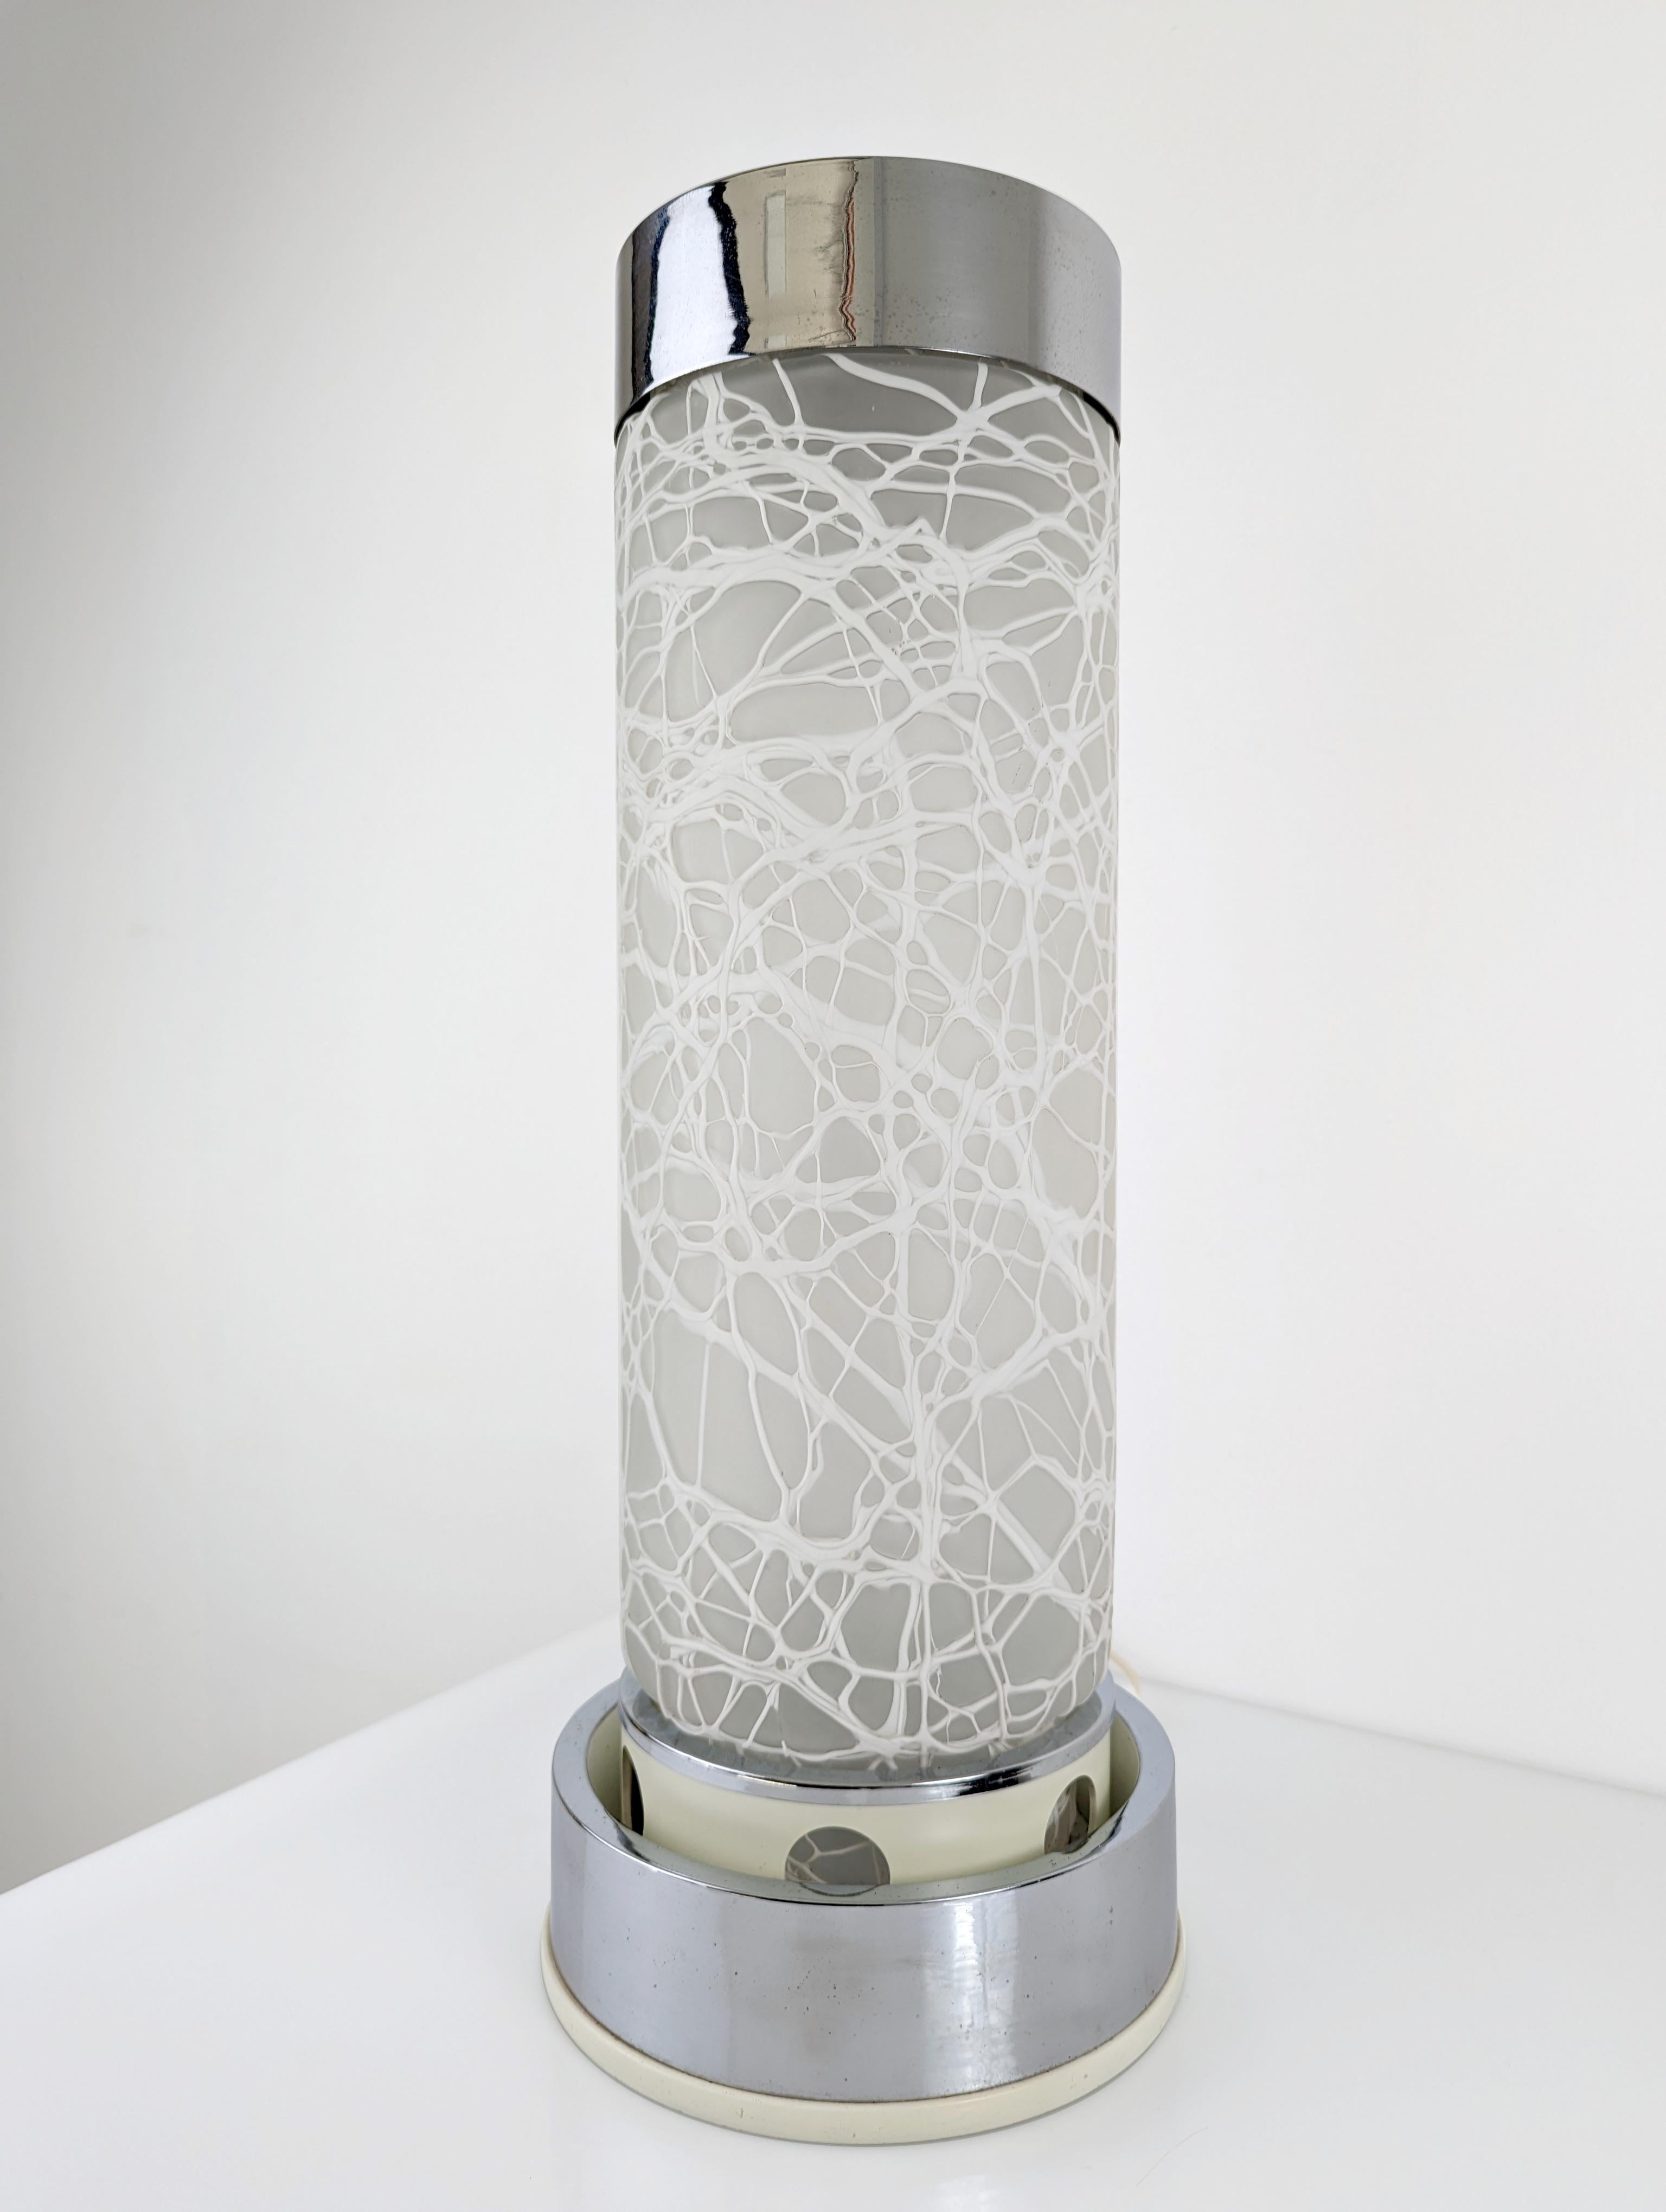 Large super exclusive table lamp made of a spectacular Murano glass with a white neuronal pattern, this incredible glass was also used by Angelo Brotto for Esperia in his most important works, as a 